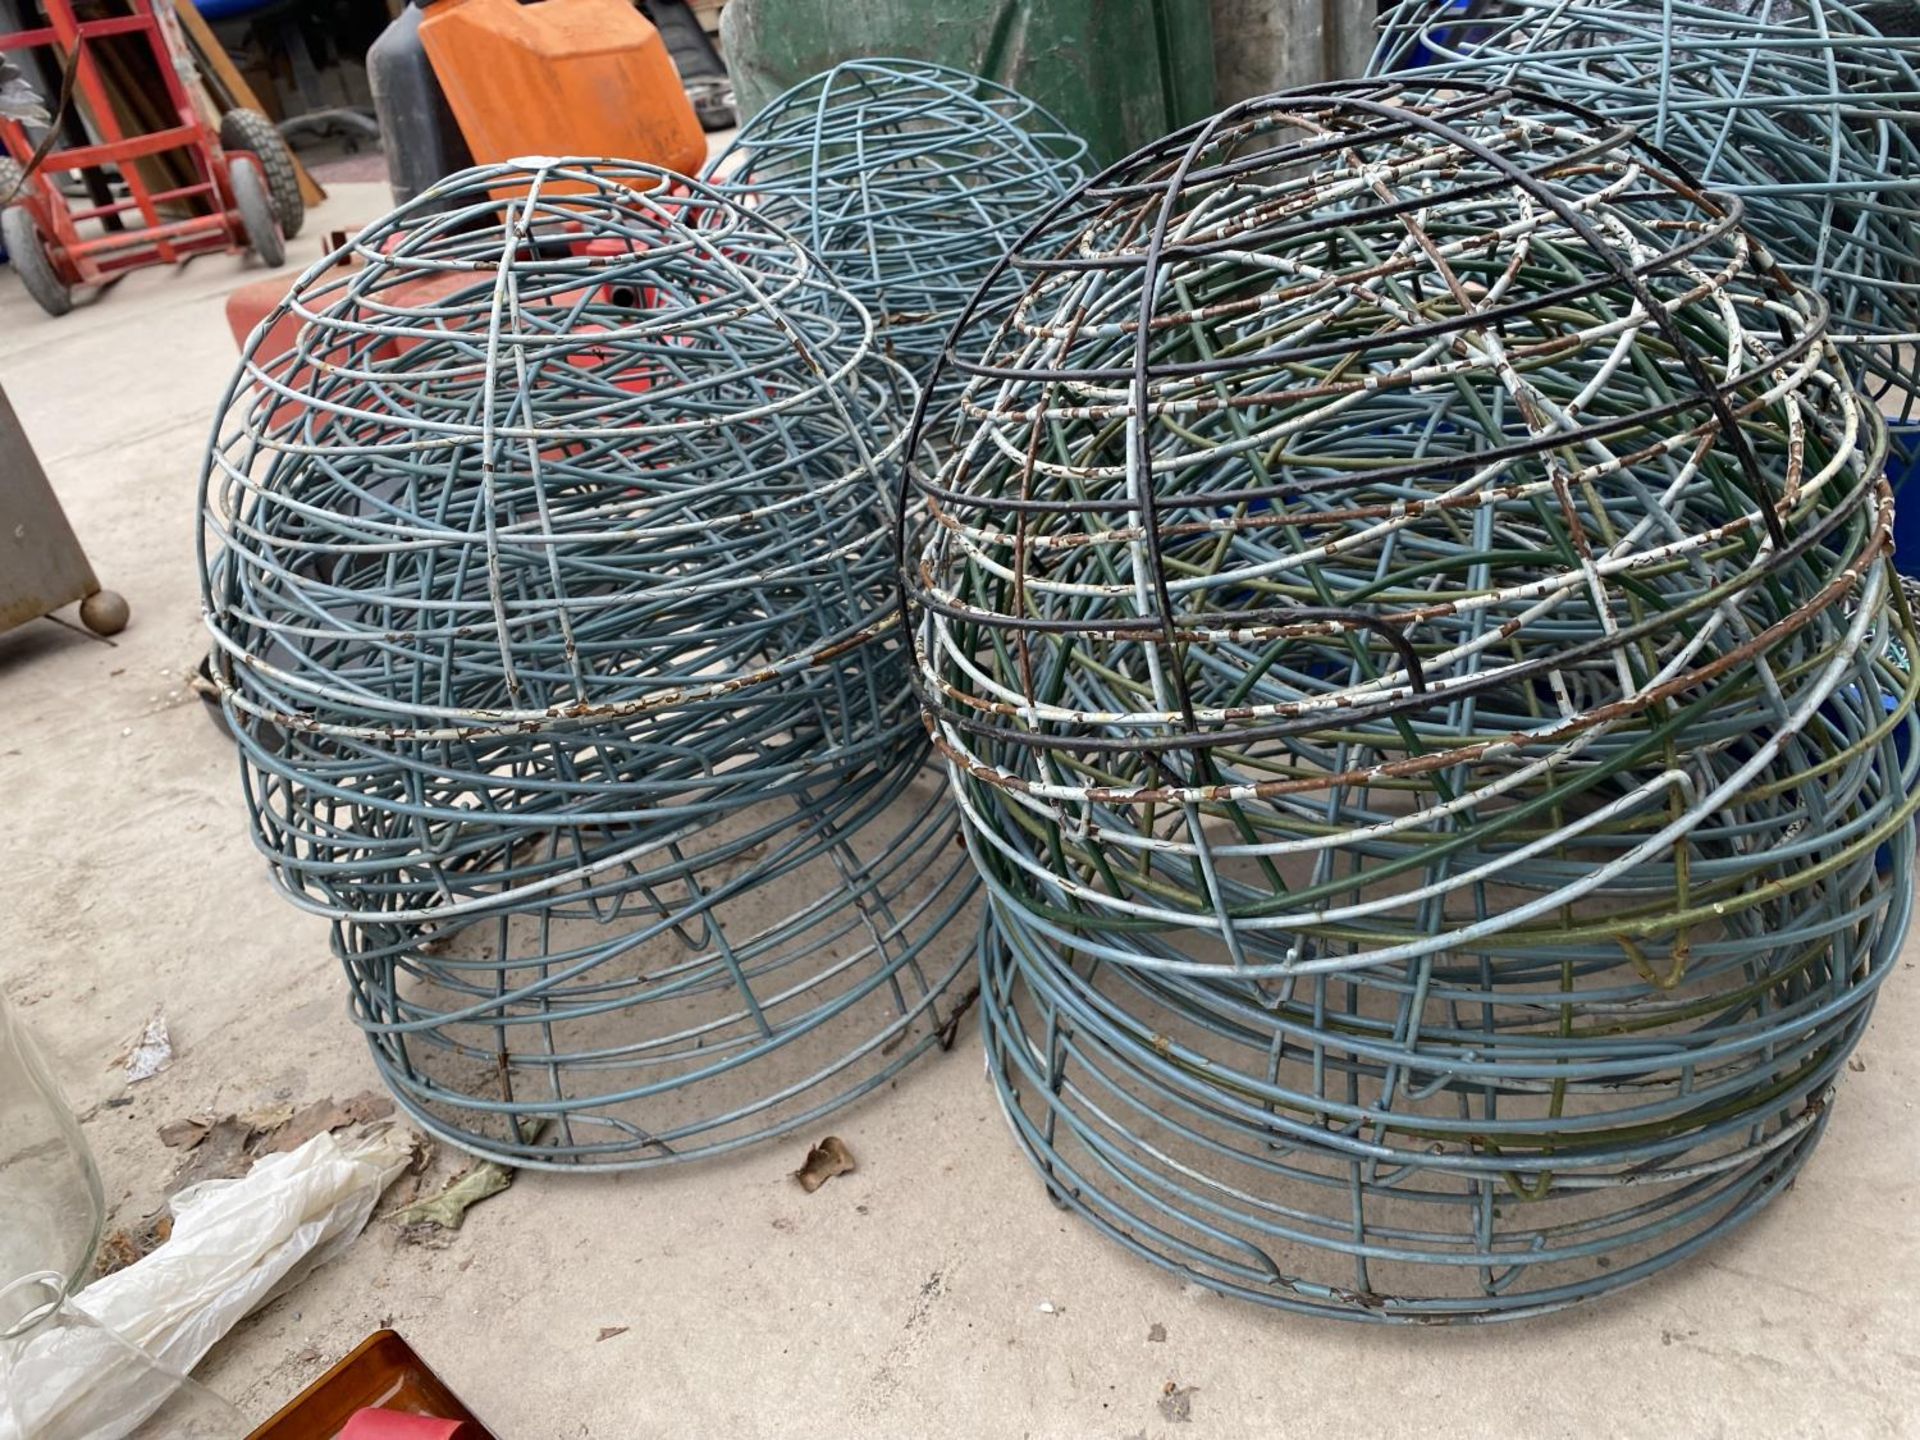 A LARGE COLLECTION OF METAL WIRE HANGING BASKETS WITH HANGING CHAINS - Image 2 of 3